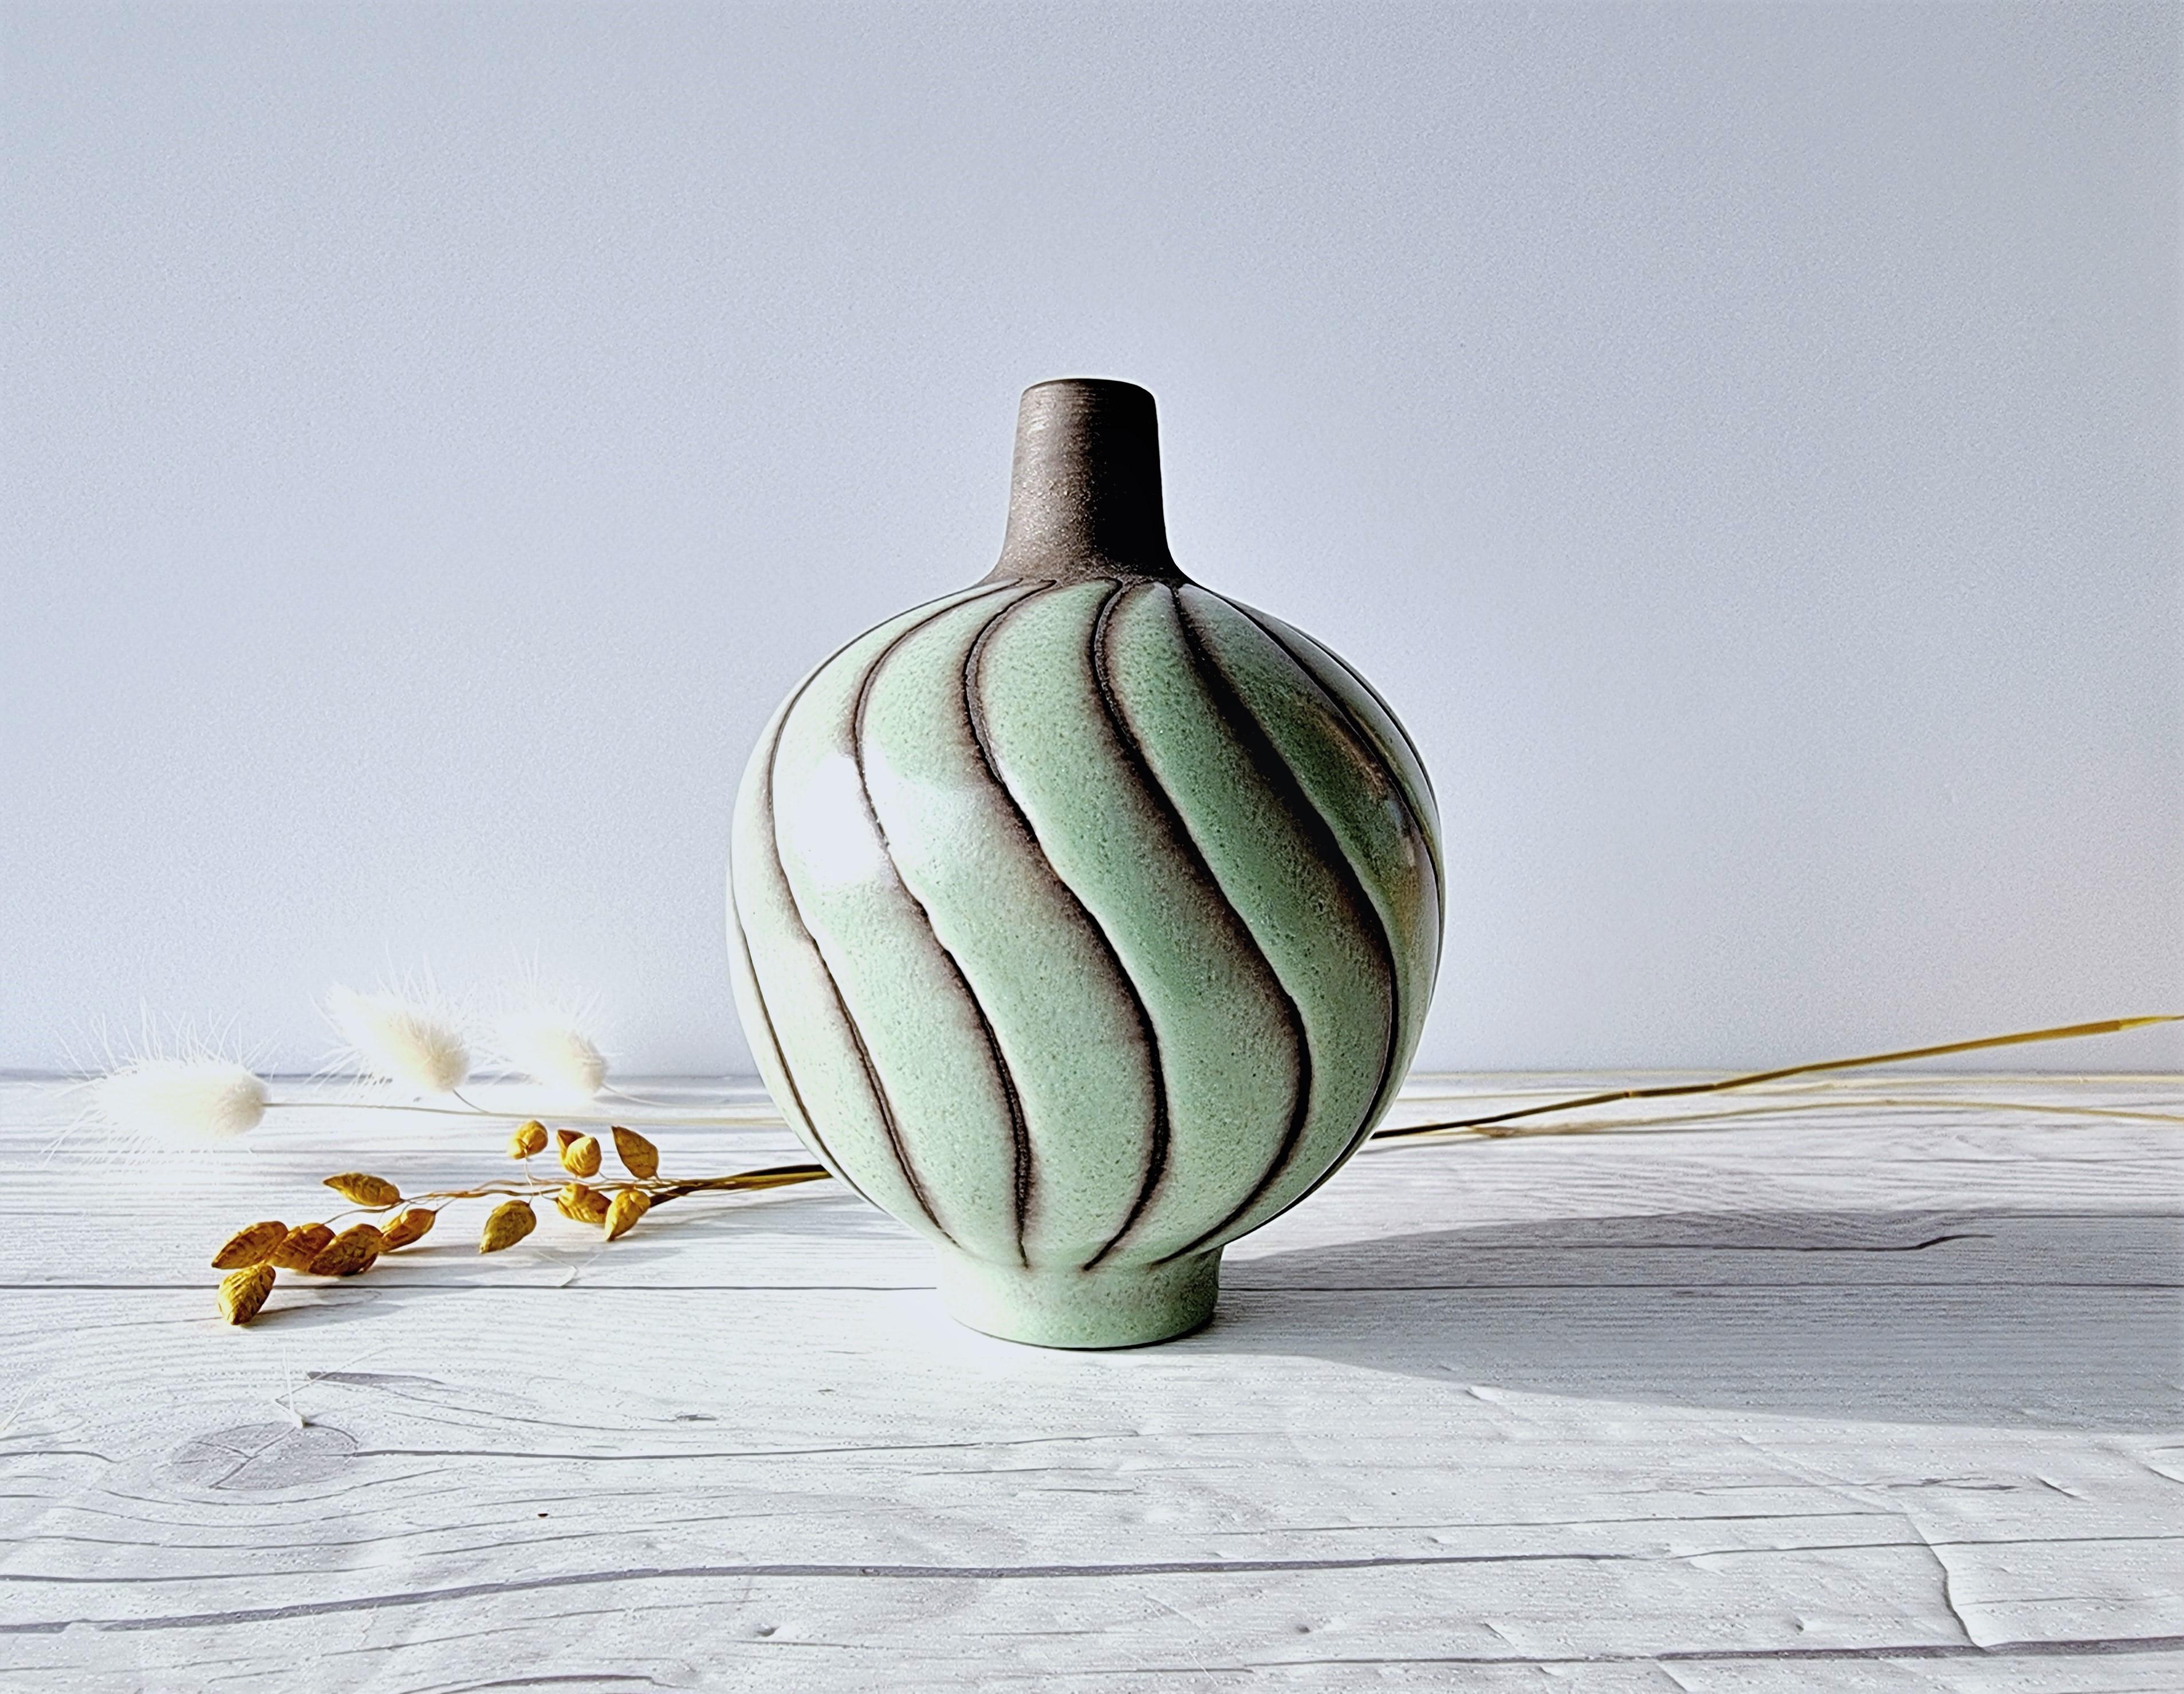 This exceptional work of Swedish Modernist is by Kjell Blomberg (b. 1931 - d. 1989) for Upsala Ekeby. Blomberg was a leading Swedish Swedish ceramicist, designer and artist, known for many series he designed at Upsala Ekeby and Gullaskruf